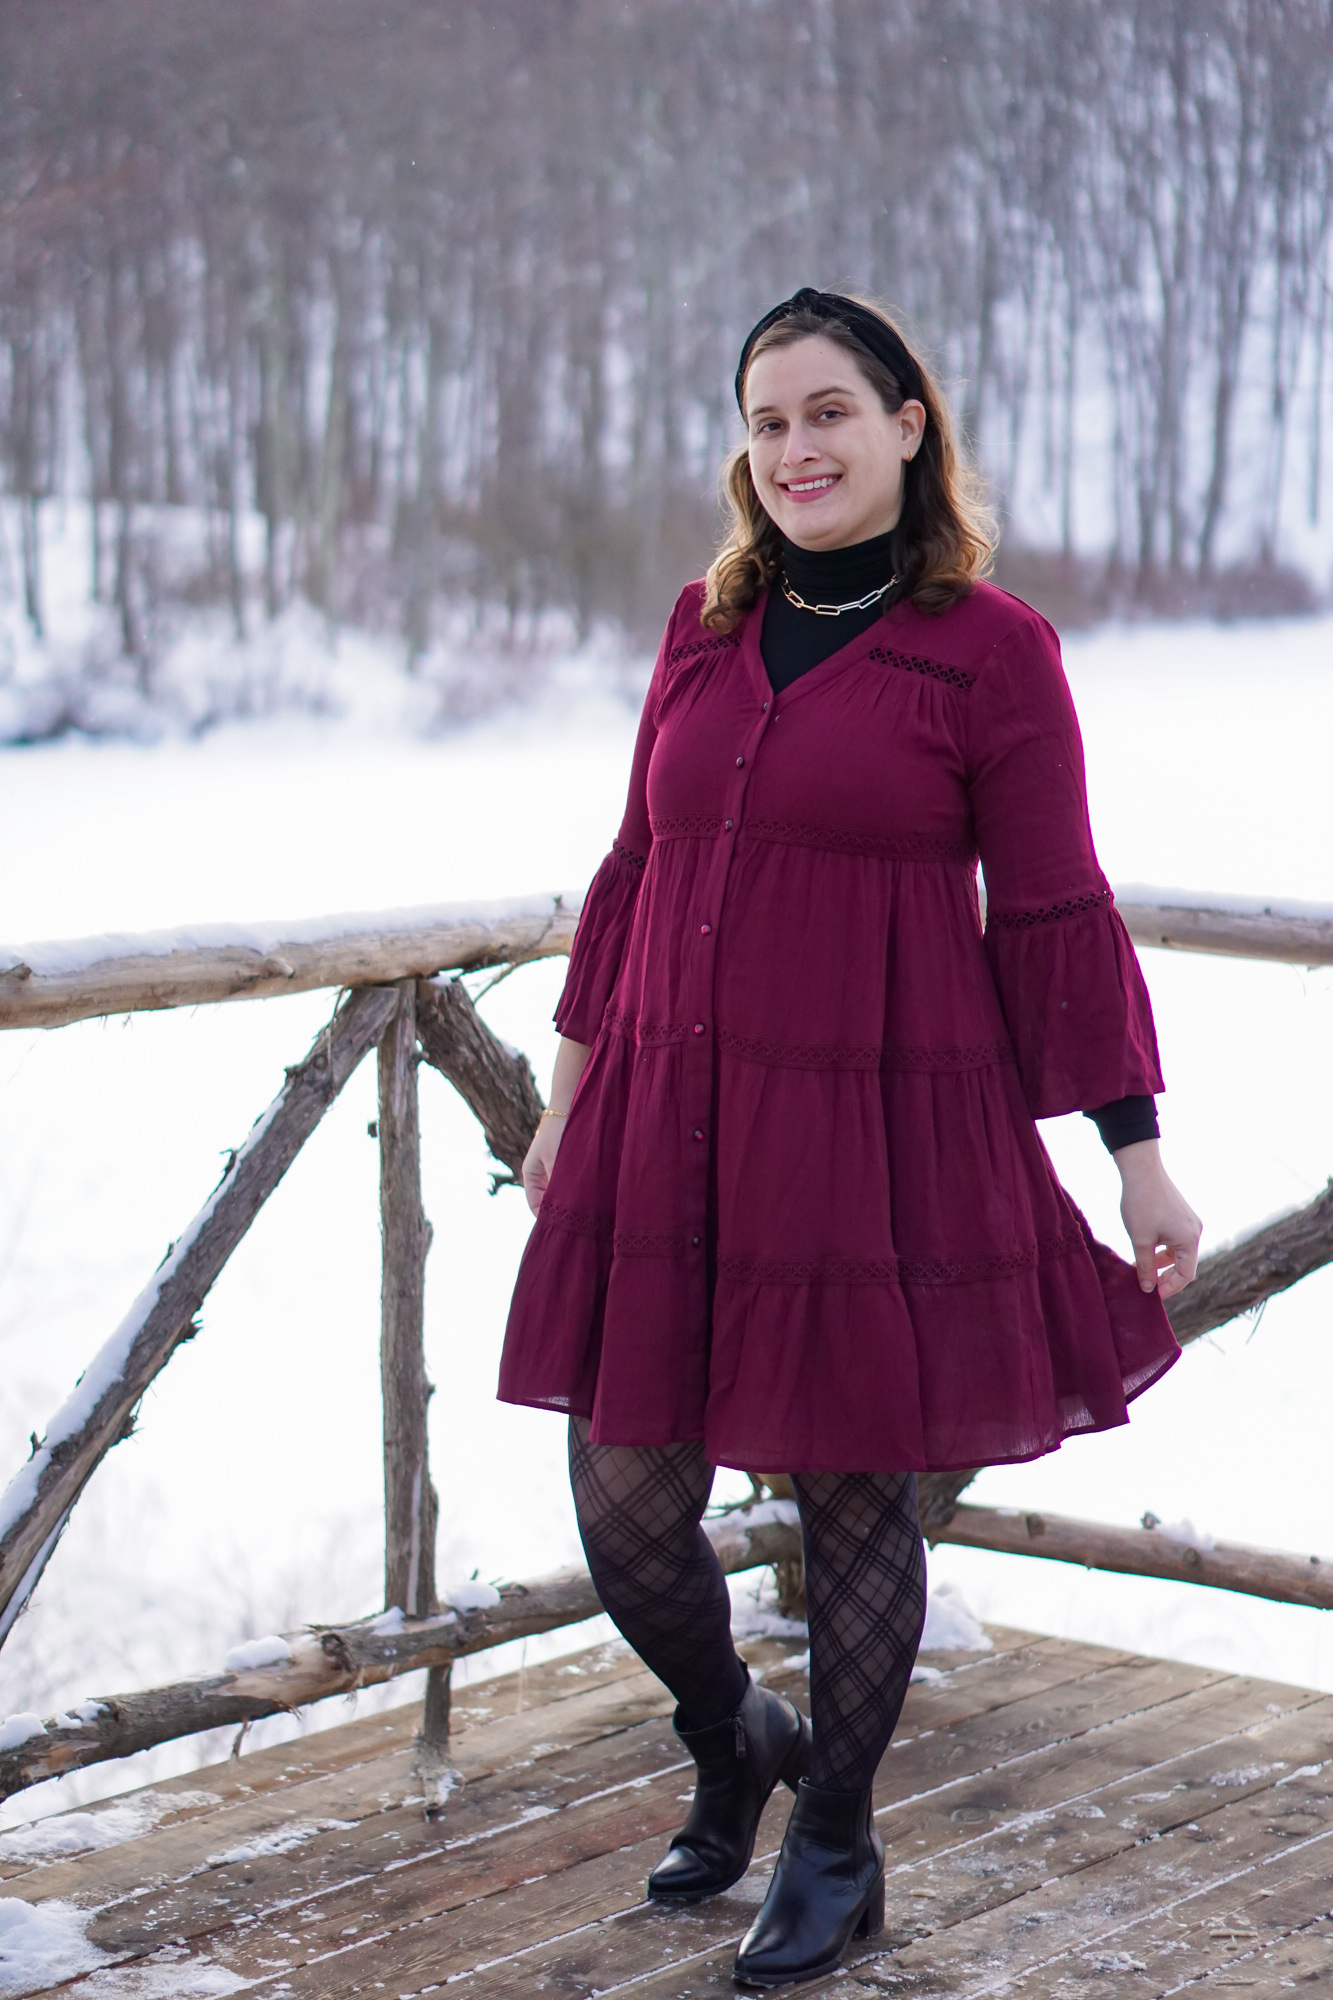 How to Wear a Short Dress: Winter Style